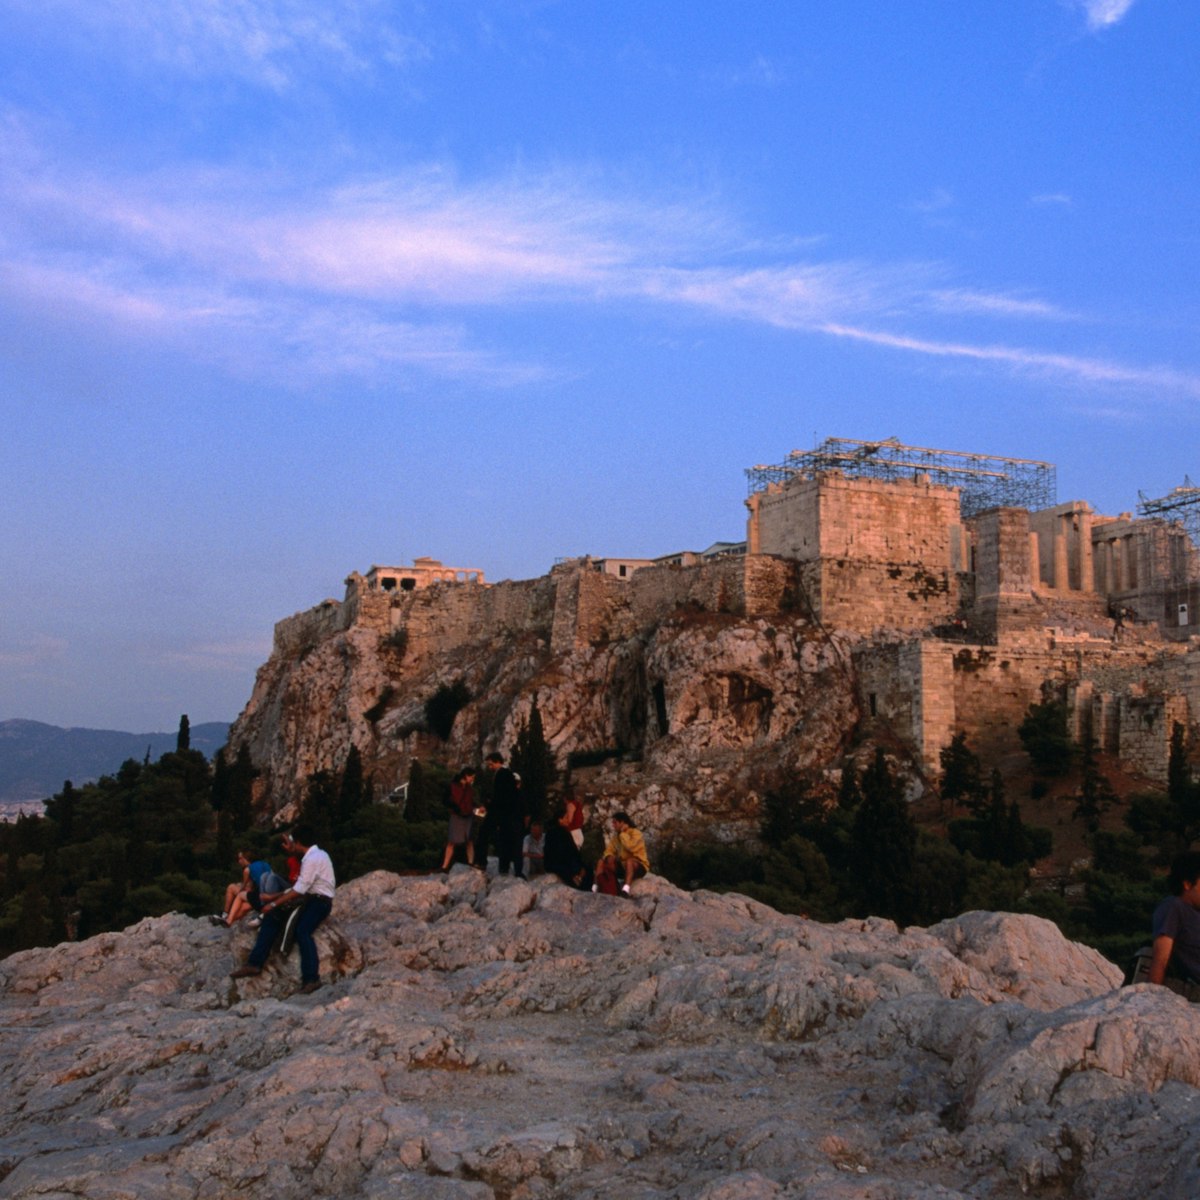 View of Acropolis from Areopagus Hill.